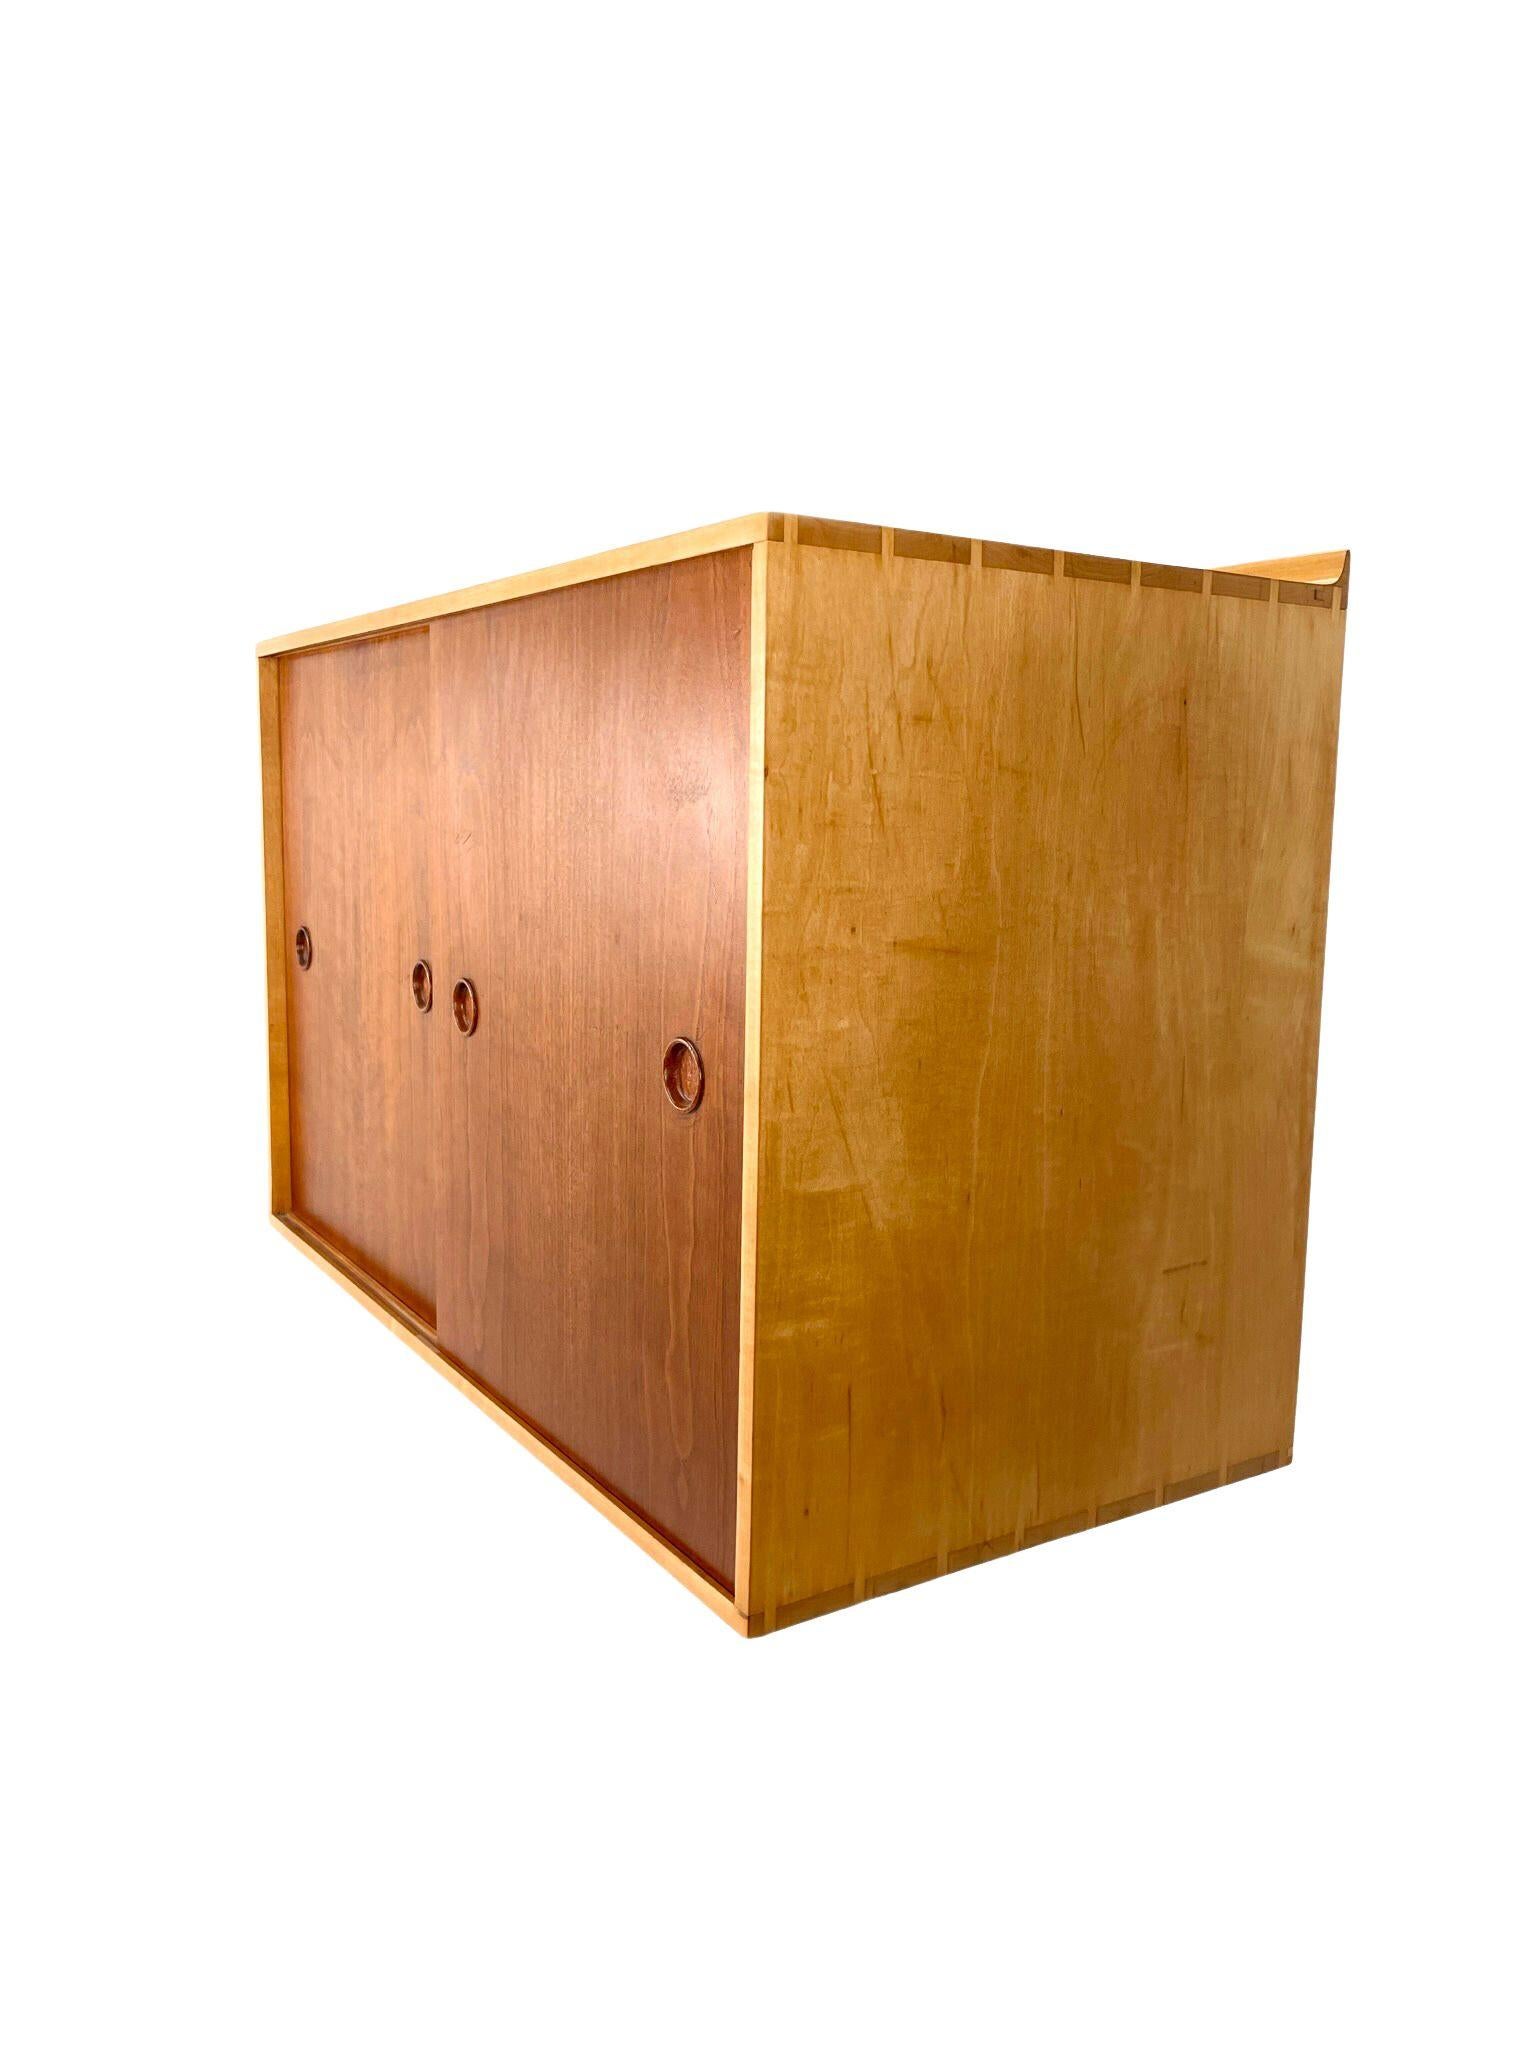 Mid-Century Modern Wall Mounted Cabinet/Console by Finn Juhl for Baker, Teak and Maple